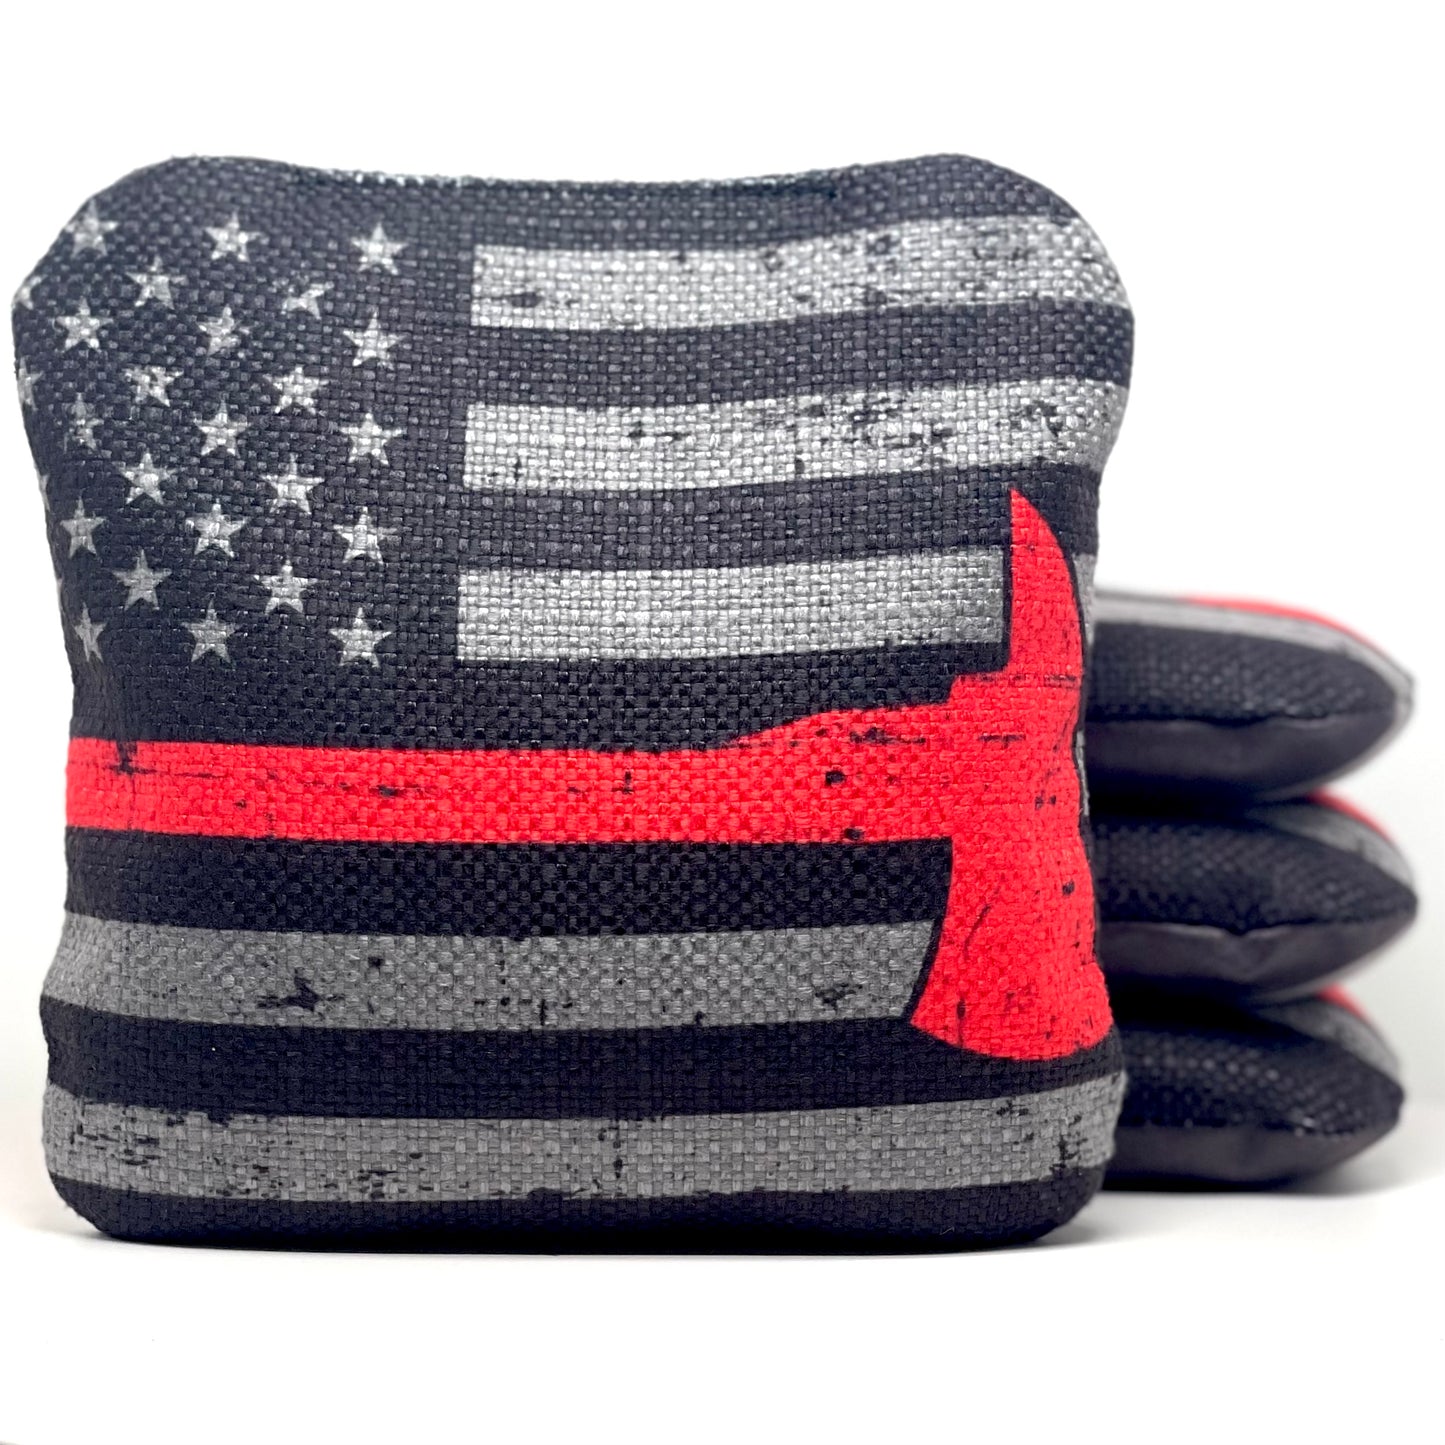 Stick 'n Slick Bags: Distressed American "Thin Red Line" bags